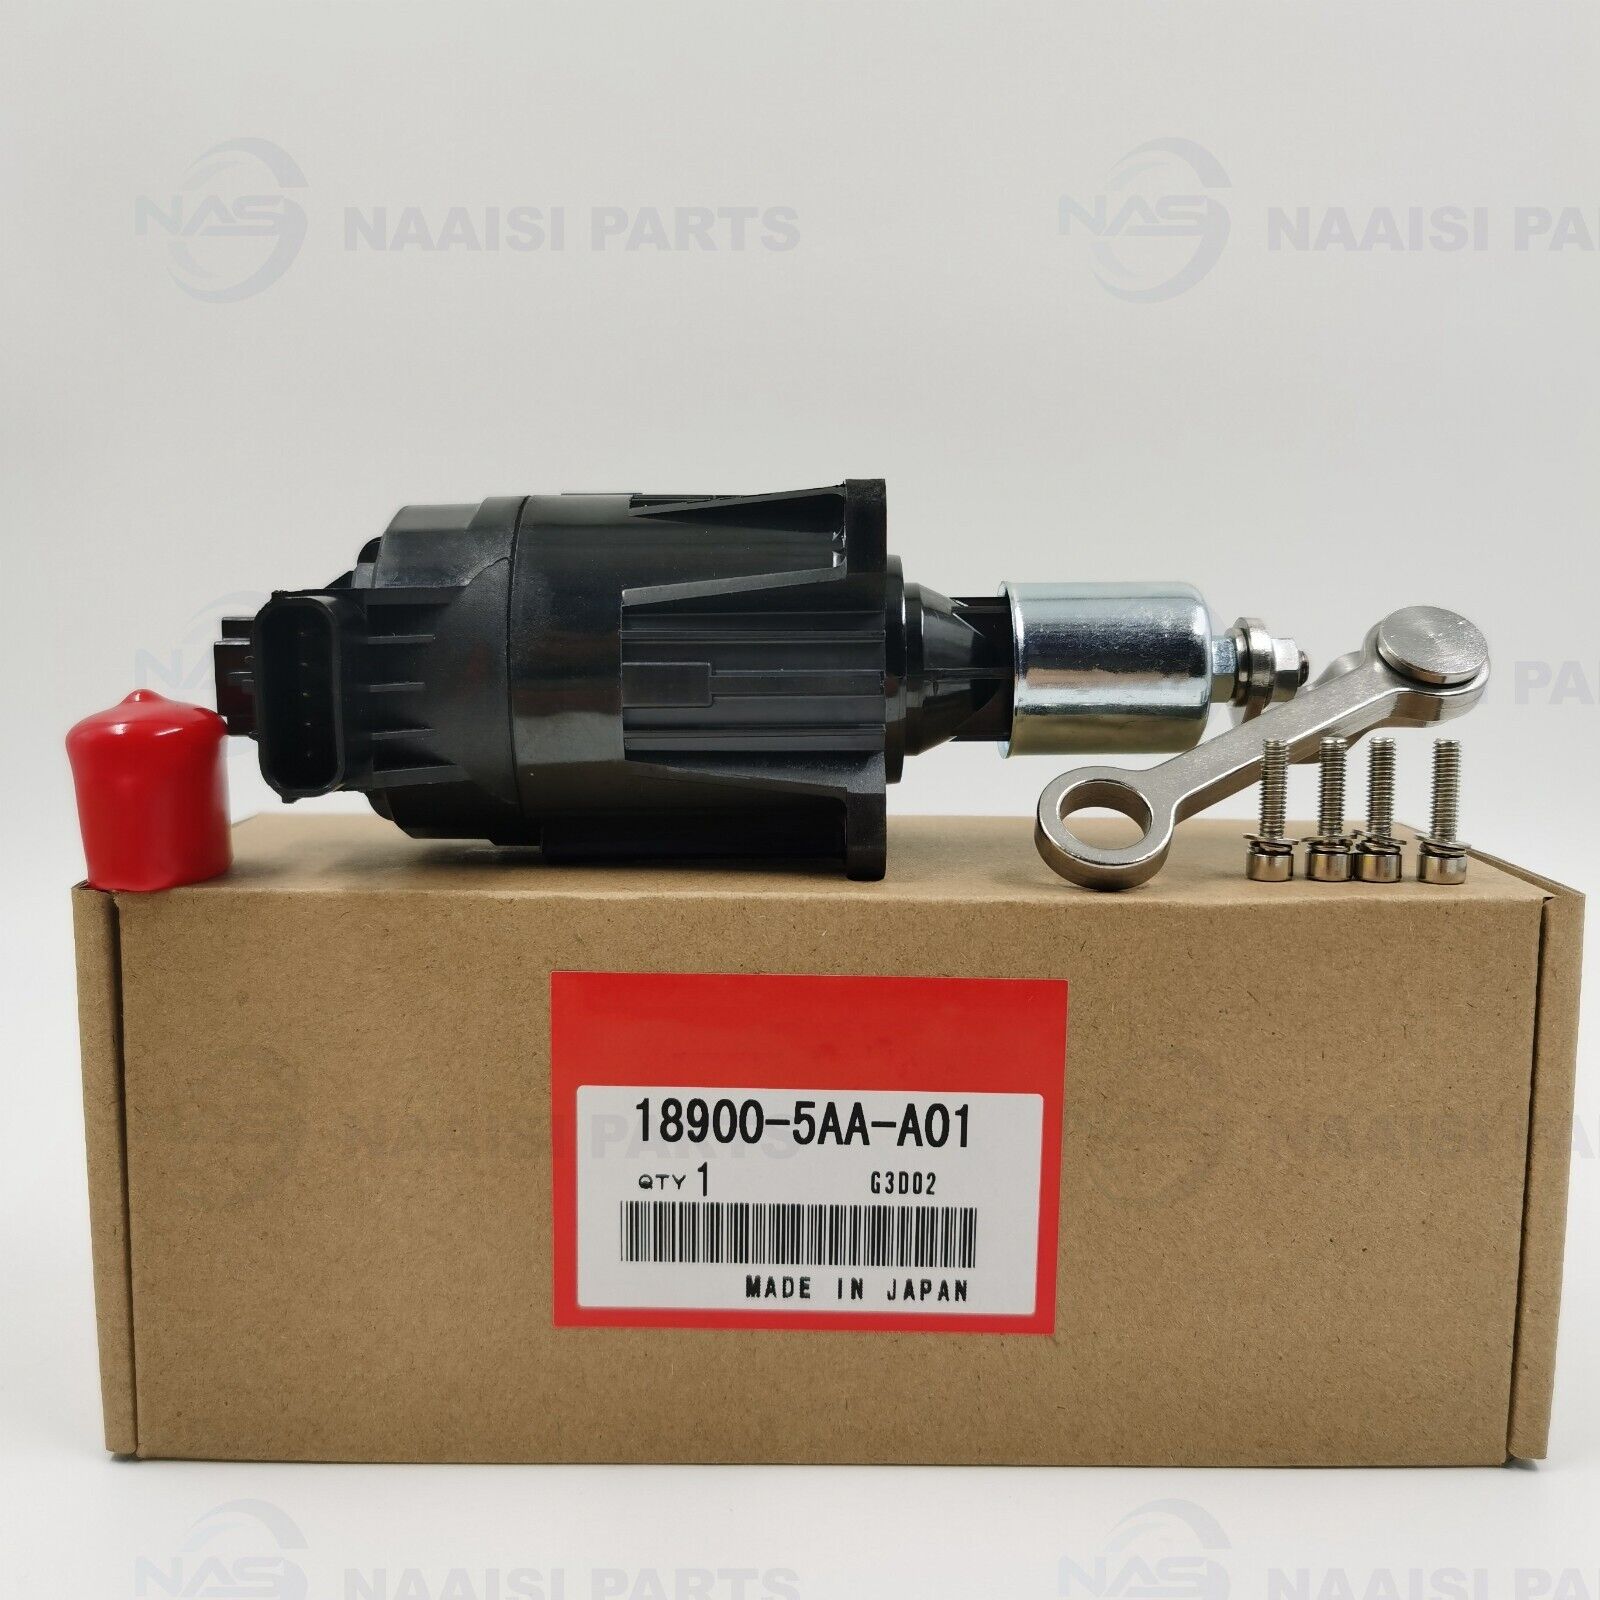 New OEM Turbo Charger Solenoid Valve Actuator For Honda Civic 1.5L 18900-5AA-A01